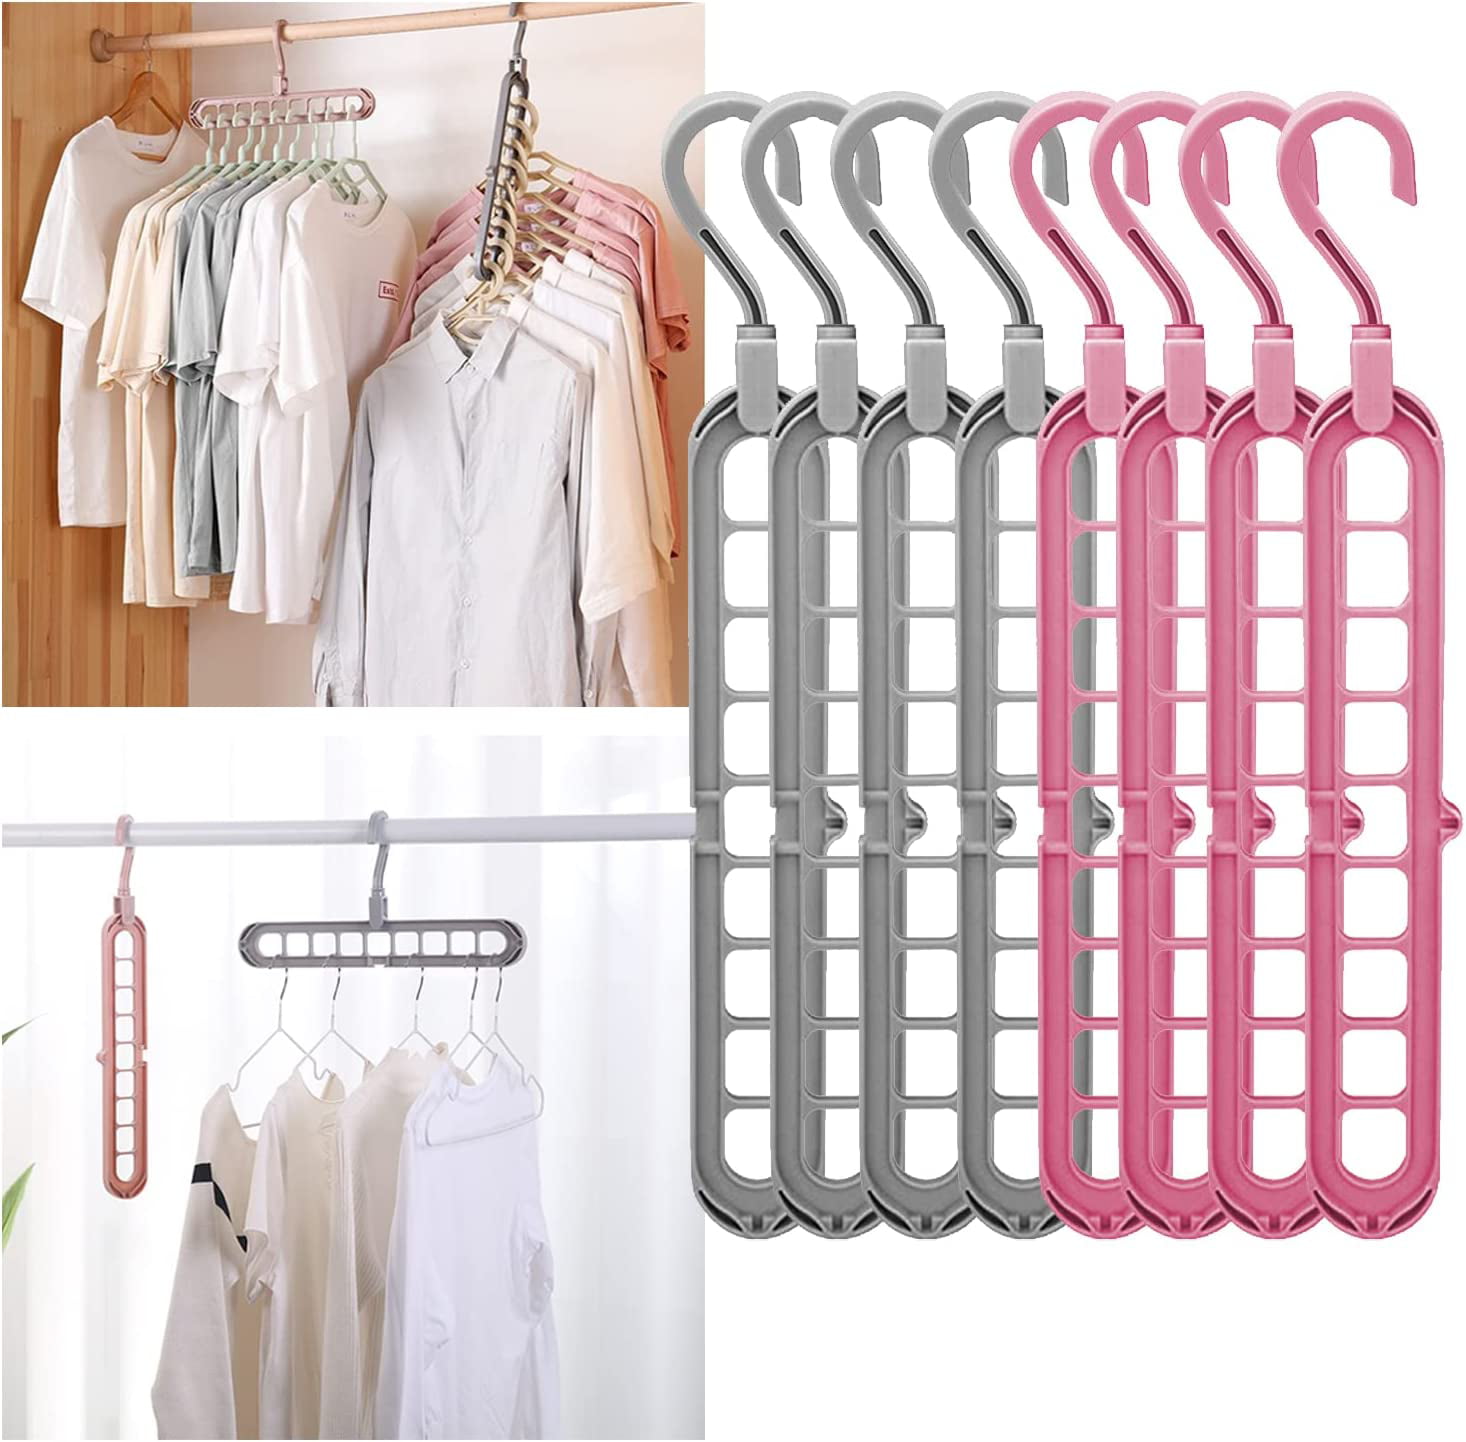 Space Saving Hangers for Clothes (8 Pack) Multi Storage Magic Hangers ...